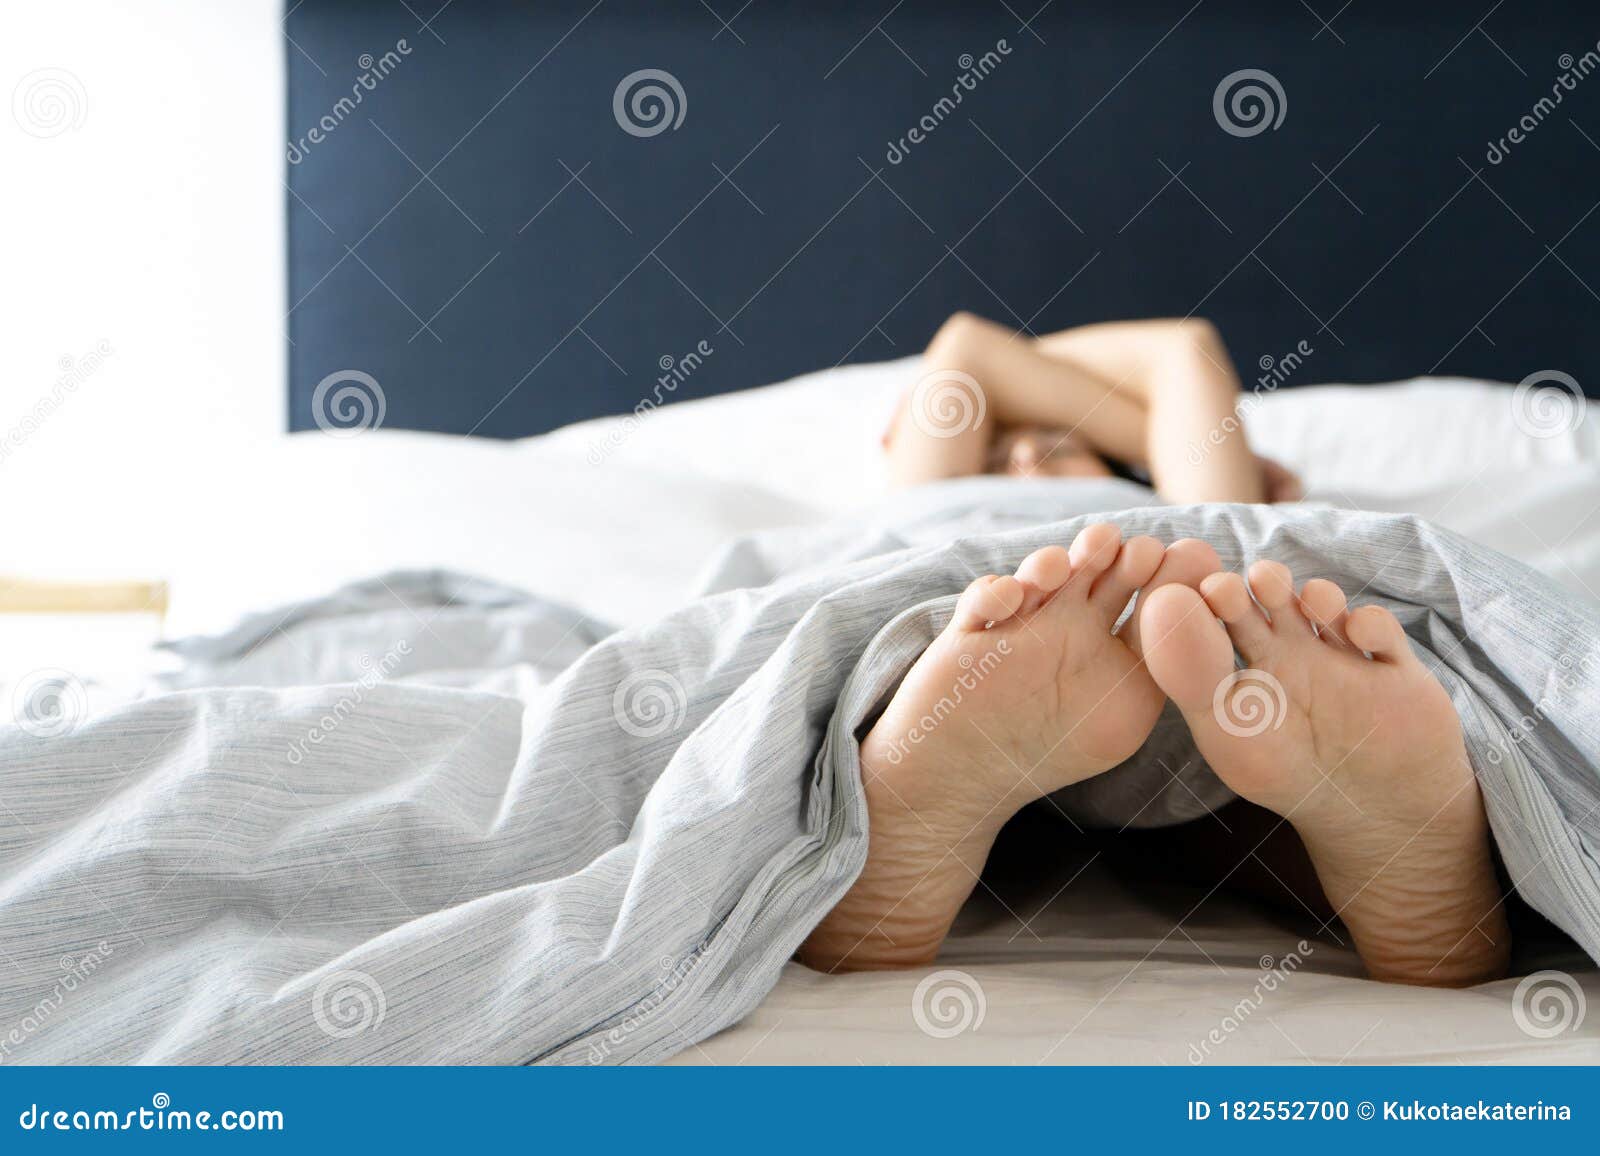 Feet Of A Sleeping Girl In Bed In The Morning Spy Photo